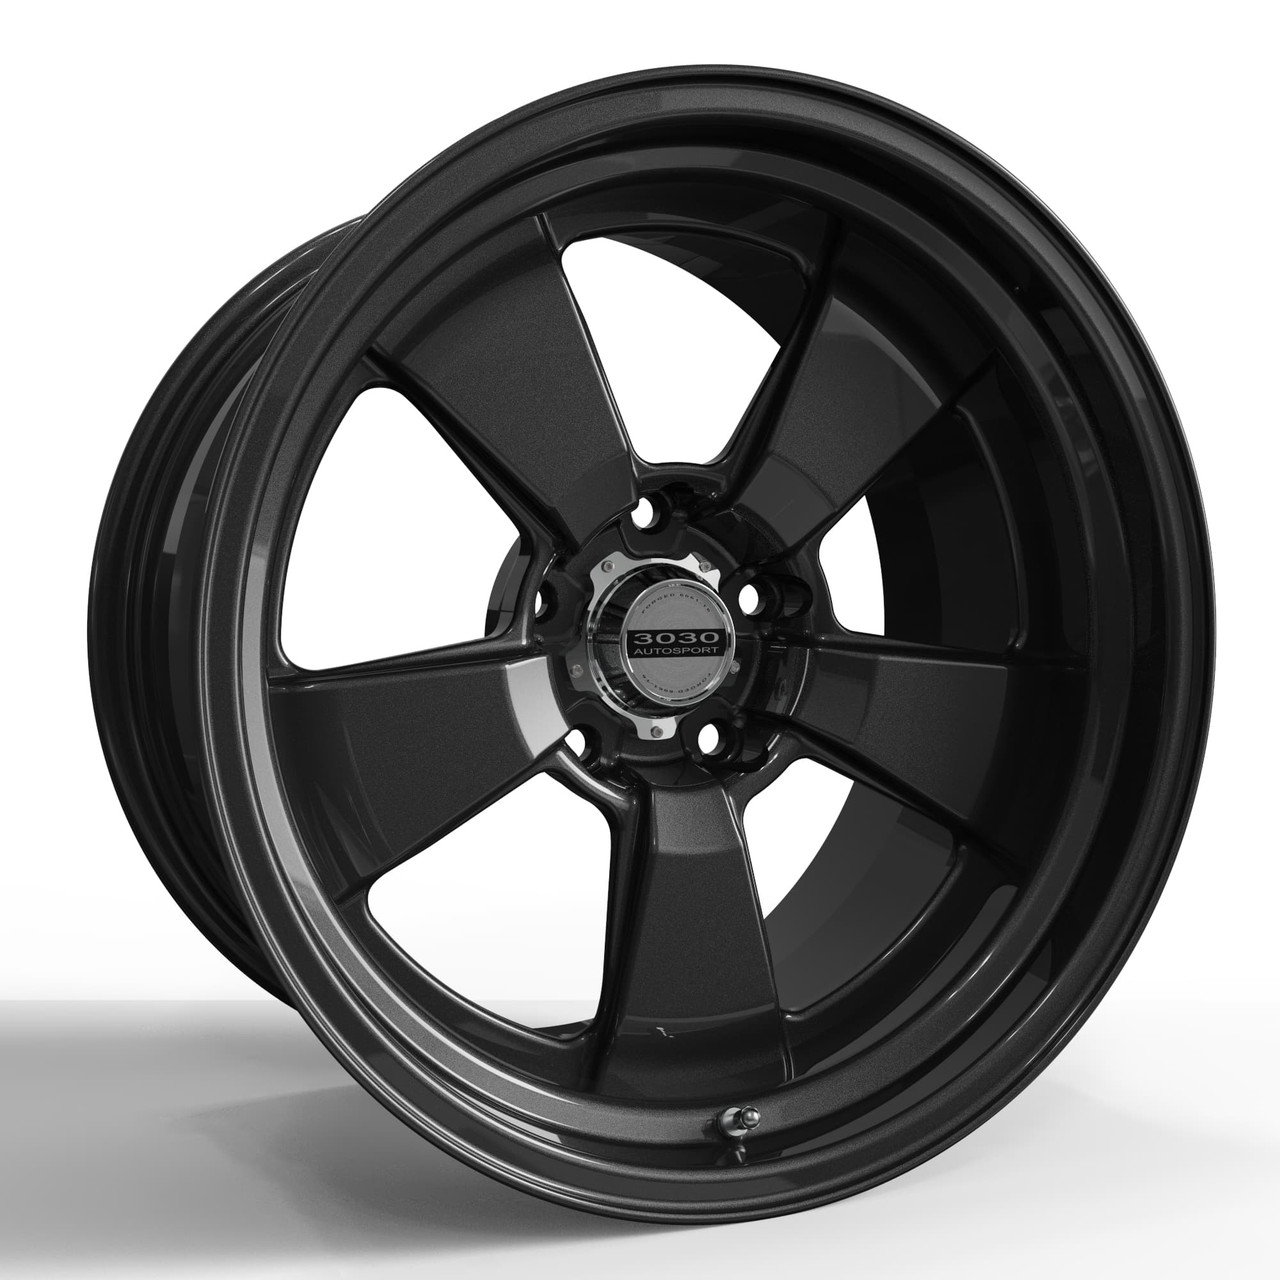 Retro 3030 Autosport Forged Muscle Car Performance Wheel